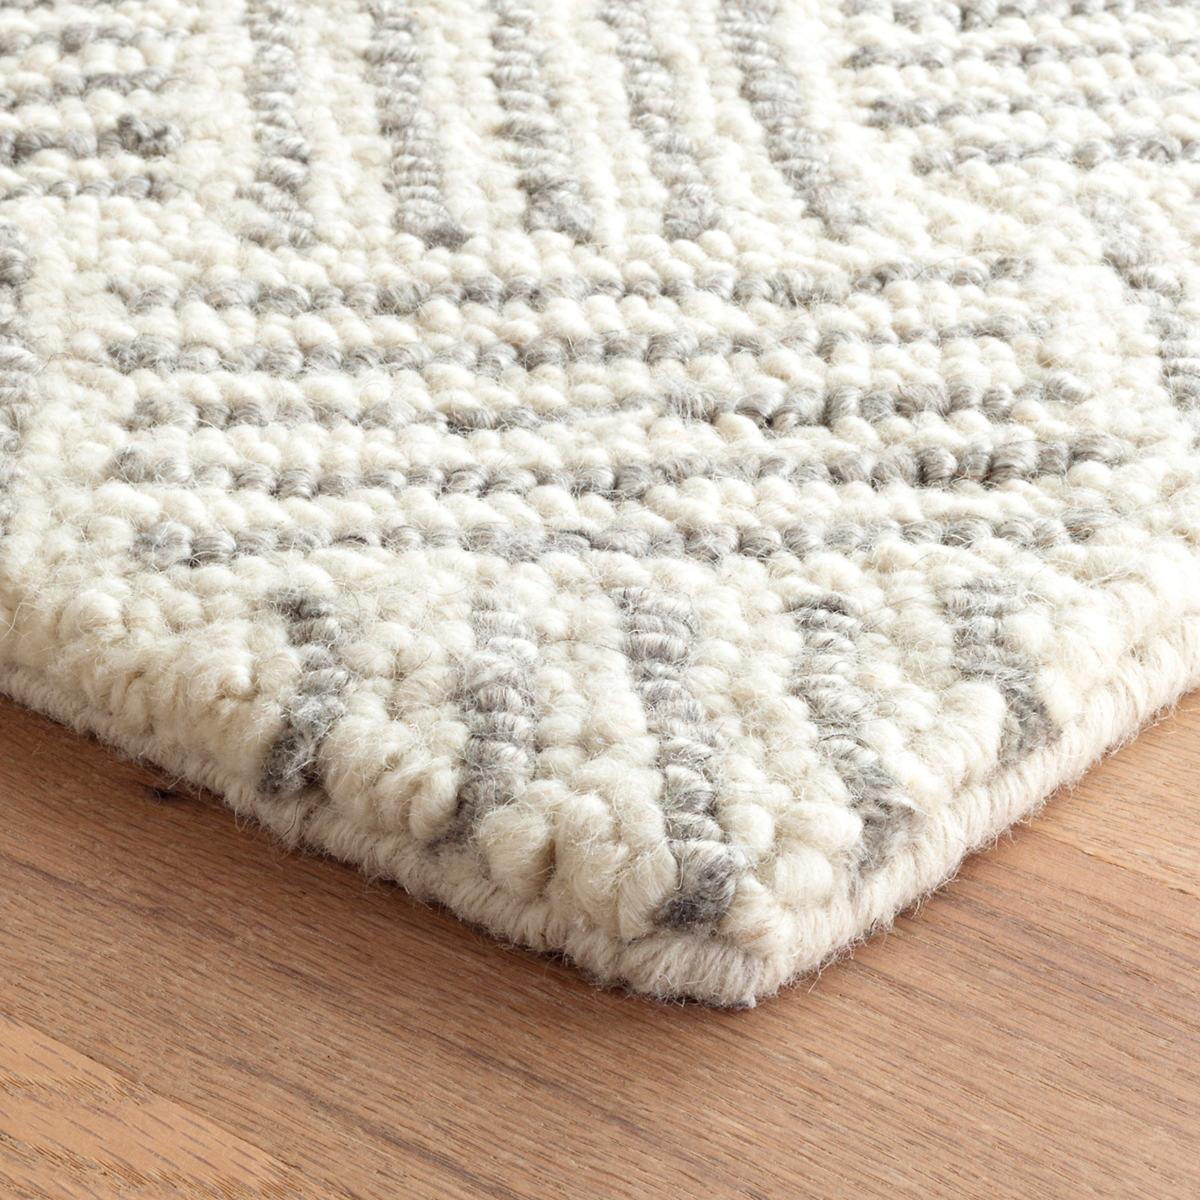 Should You Buy a Wool Carpet? (5 Considerations) - Carpet Time NYC